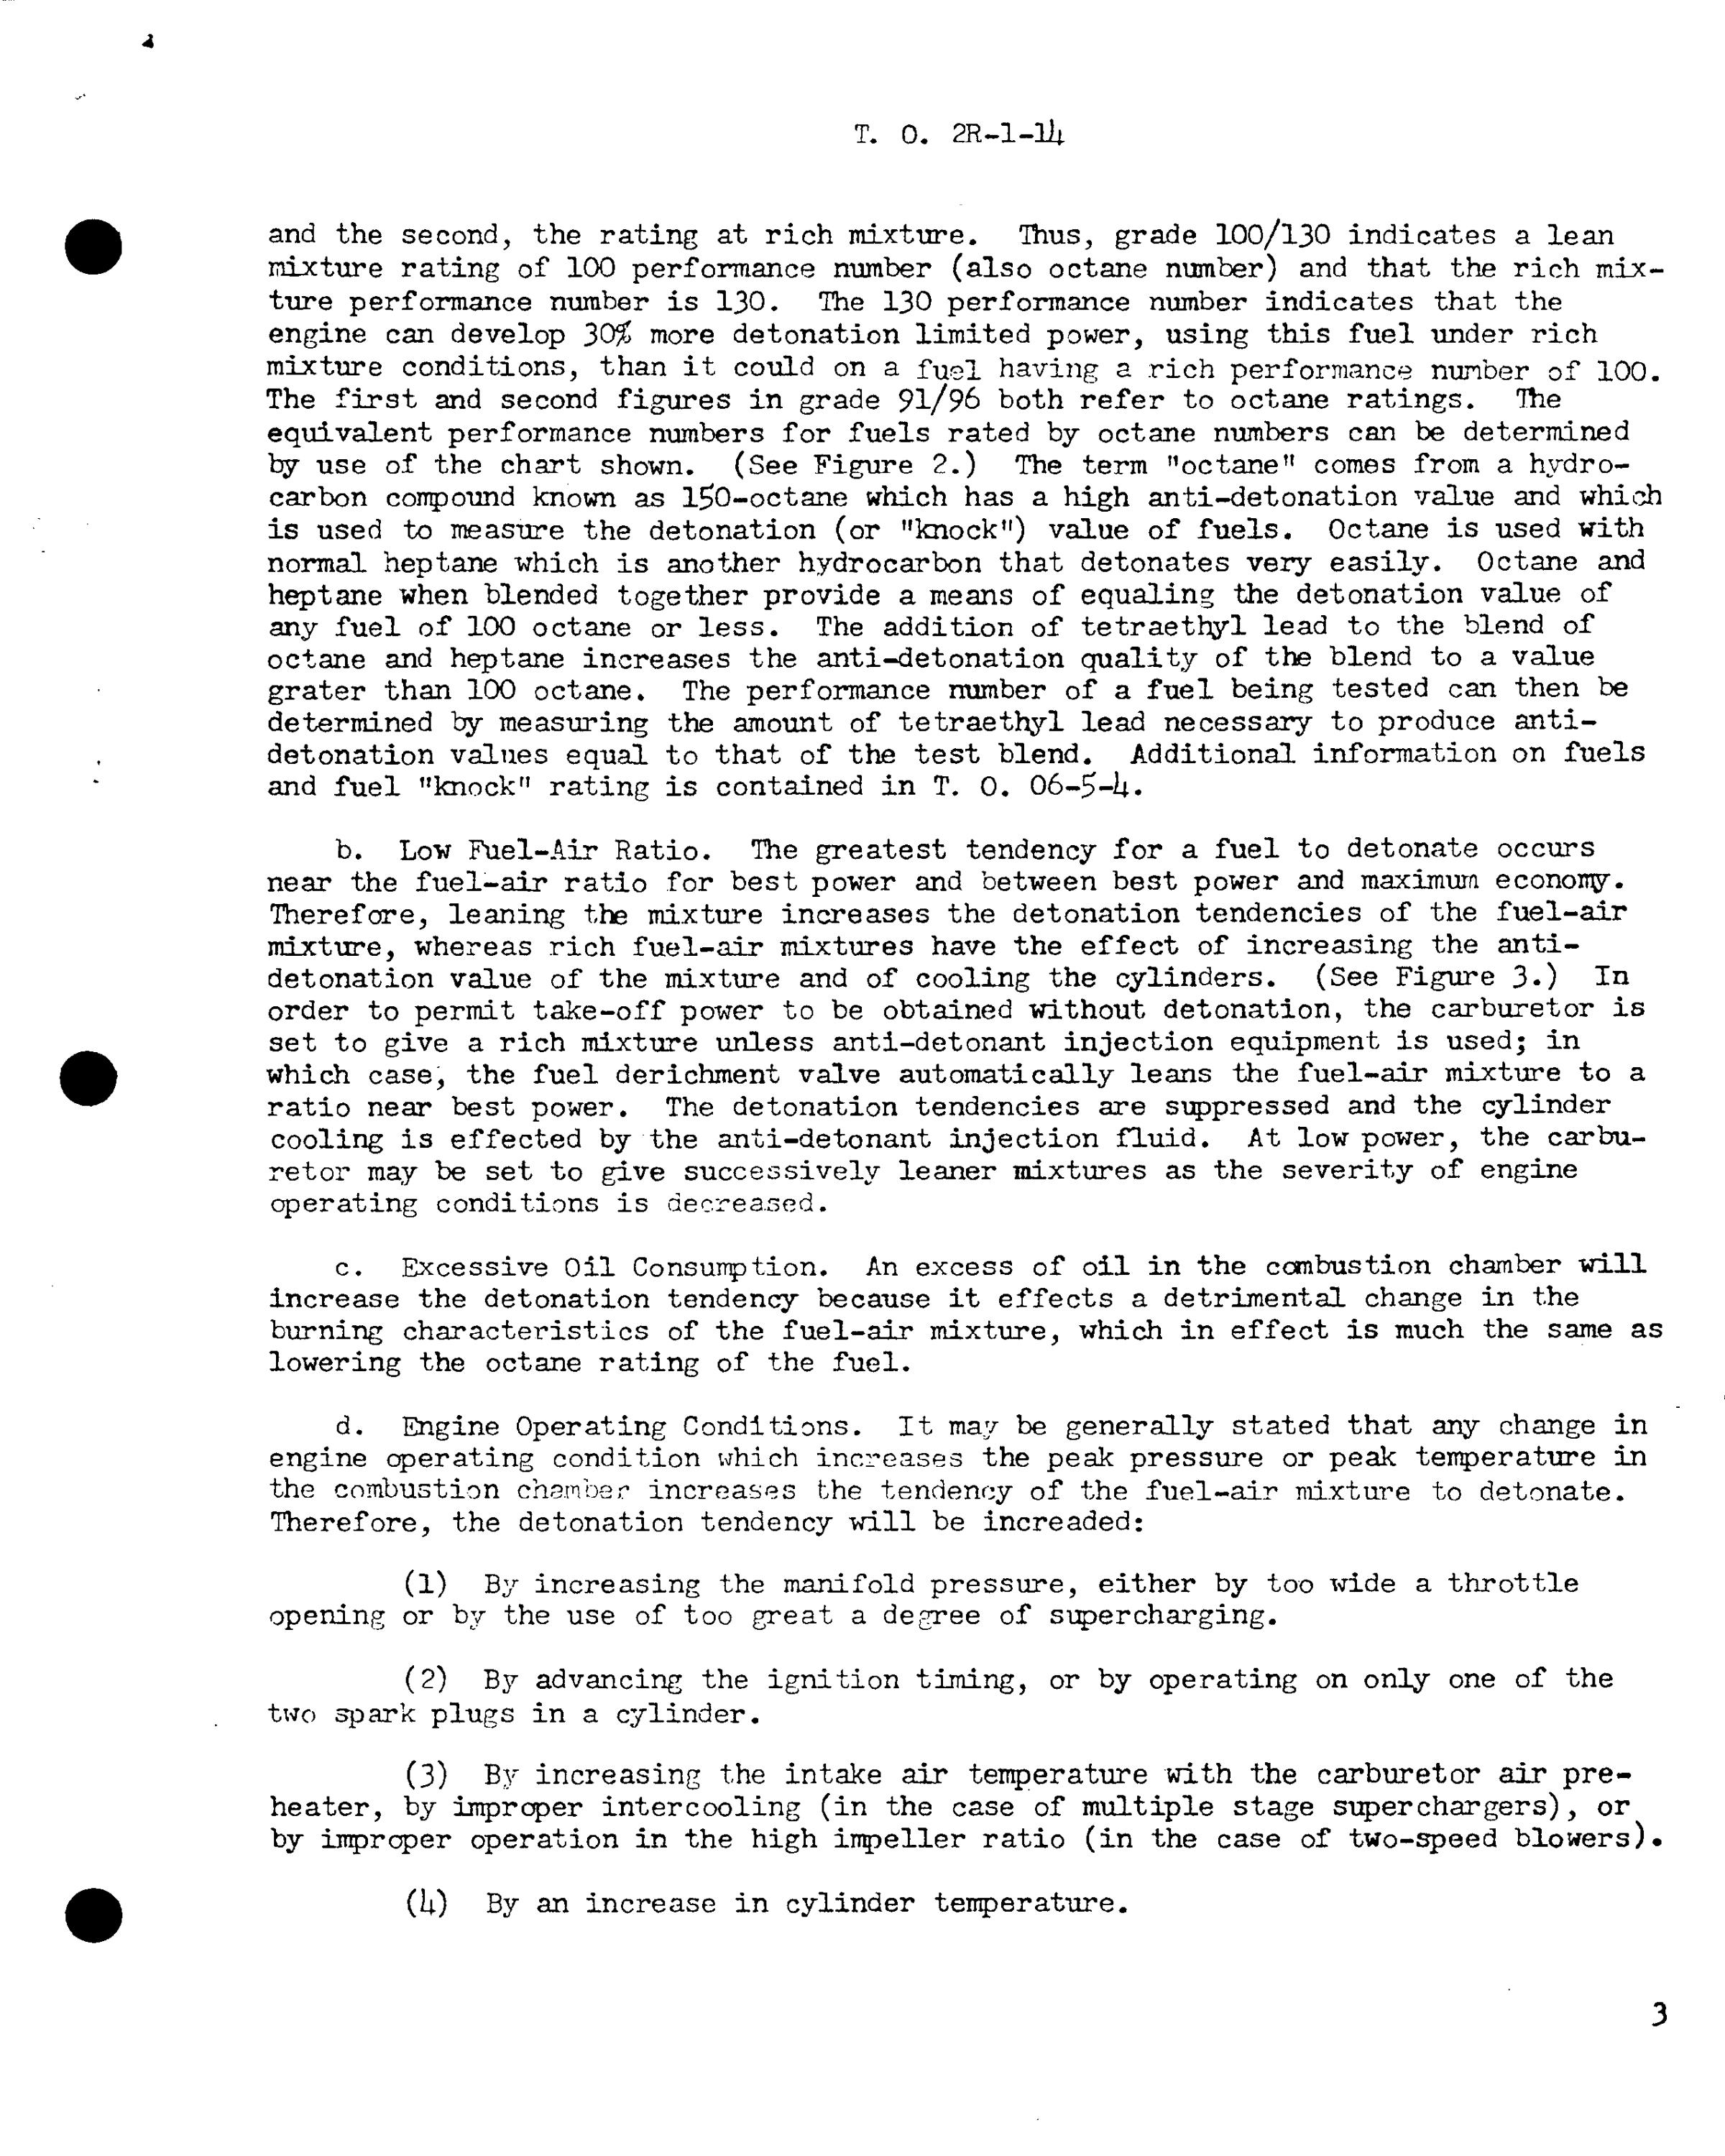 Sample page 3 from AirCorps Library document: Detonation in Aircraft Engines